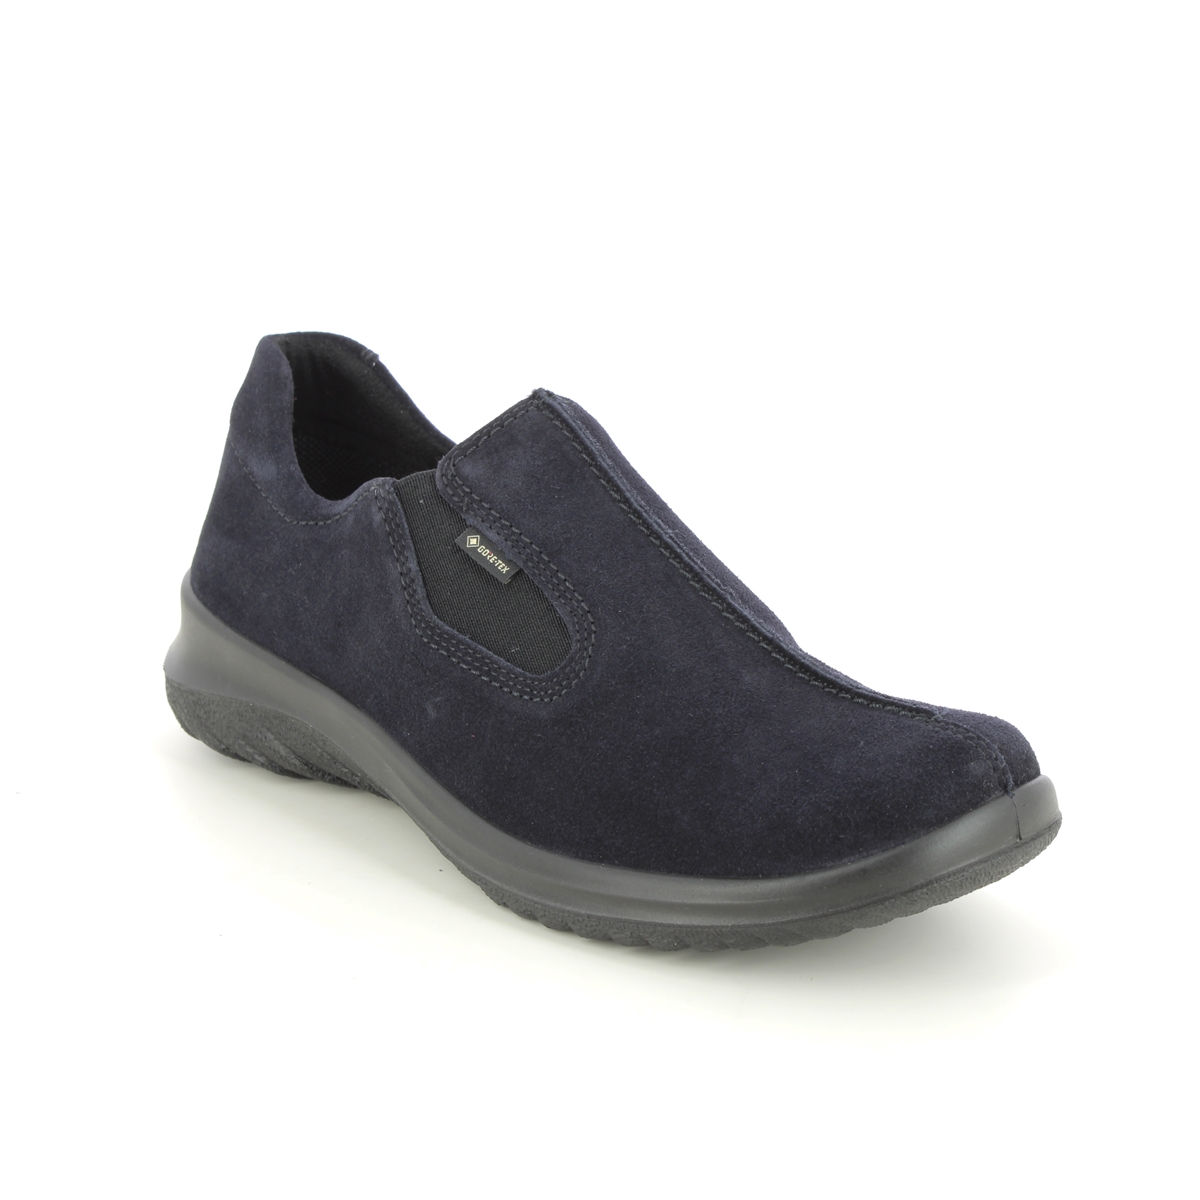 Legero Soft Shoe Gtx Navy Suede Womens Comfort Slip On Shoes 09568-80 In Size 7.5 In Plain Navy Suede